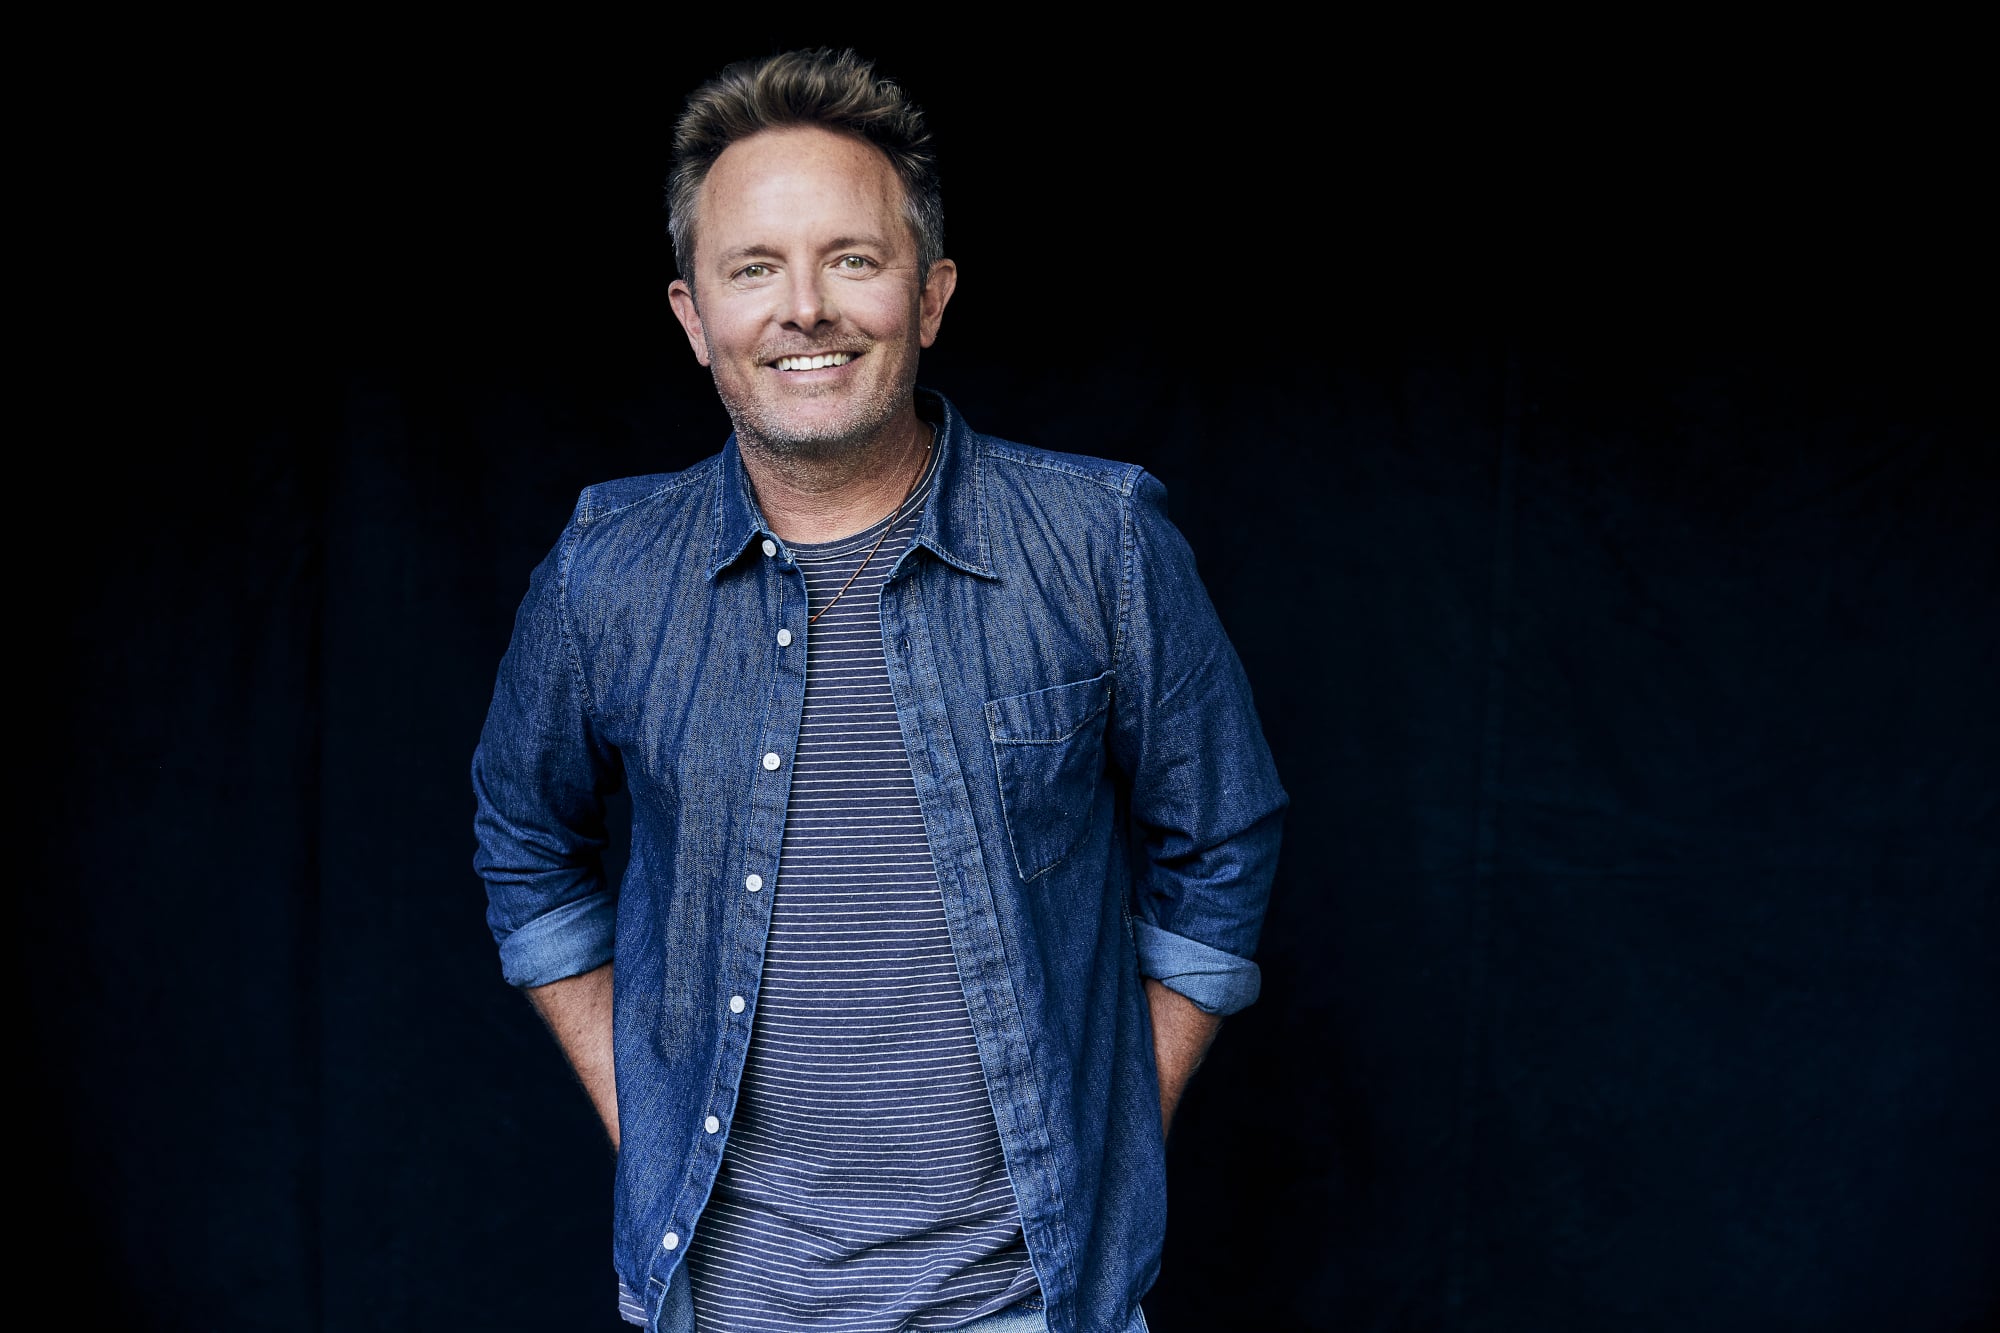 Chris Tomlin Shares The Stories Behind ‘Chris Tomlin and Friends’